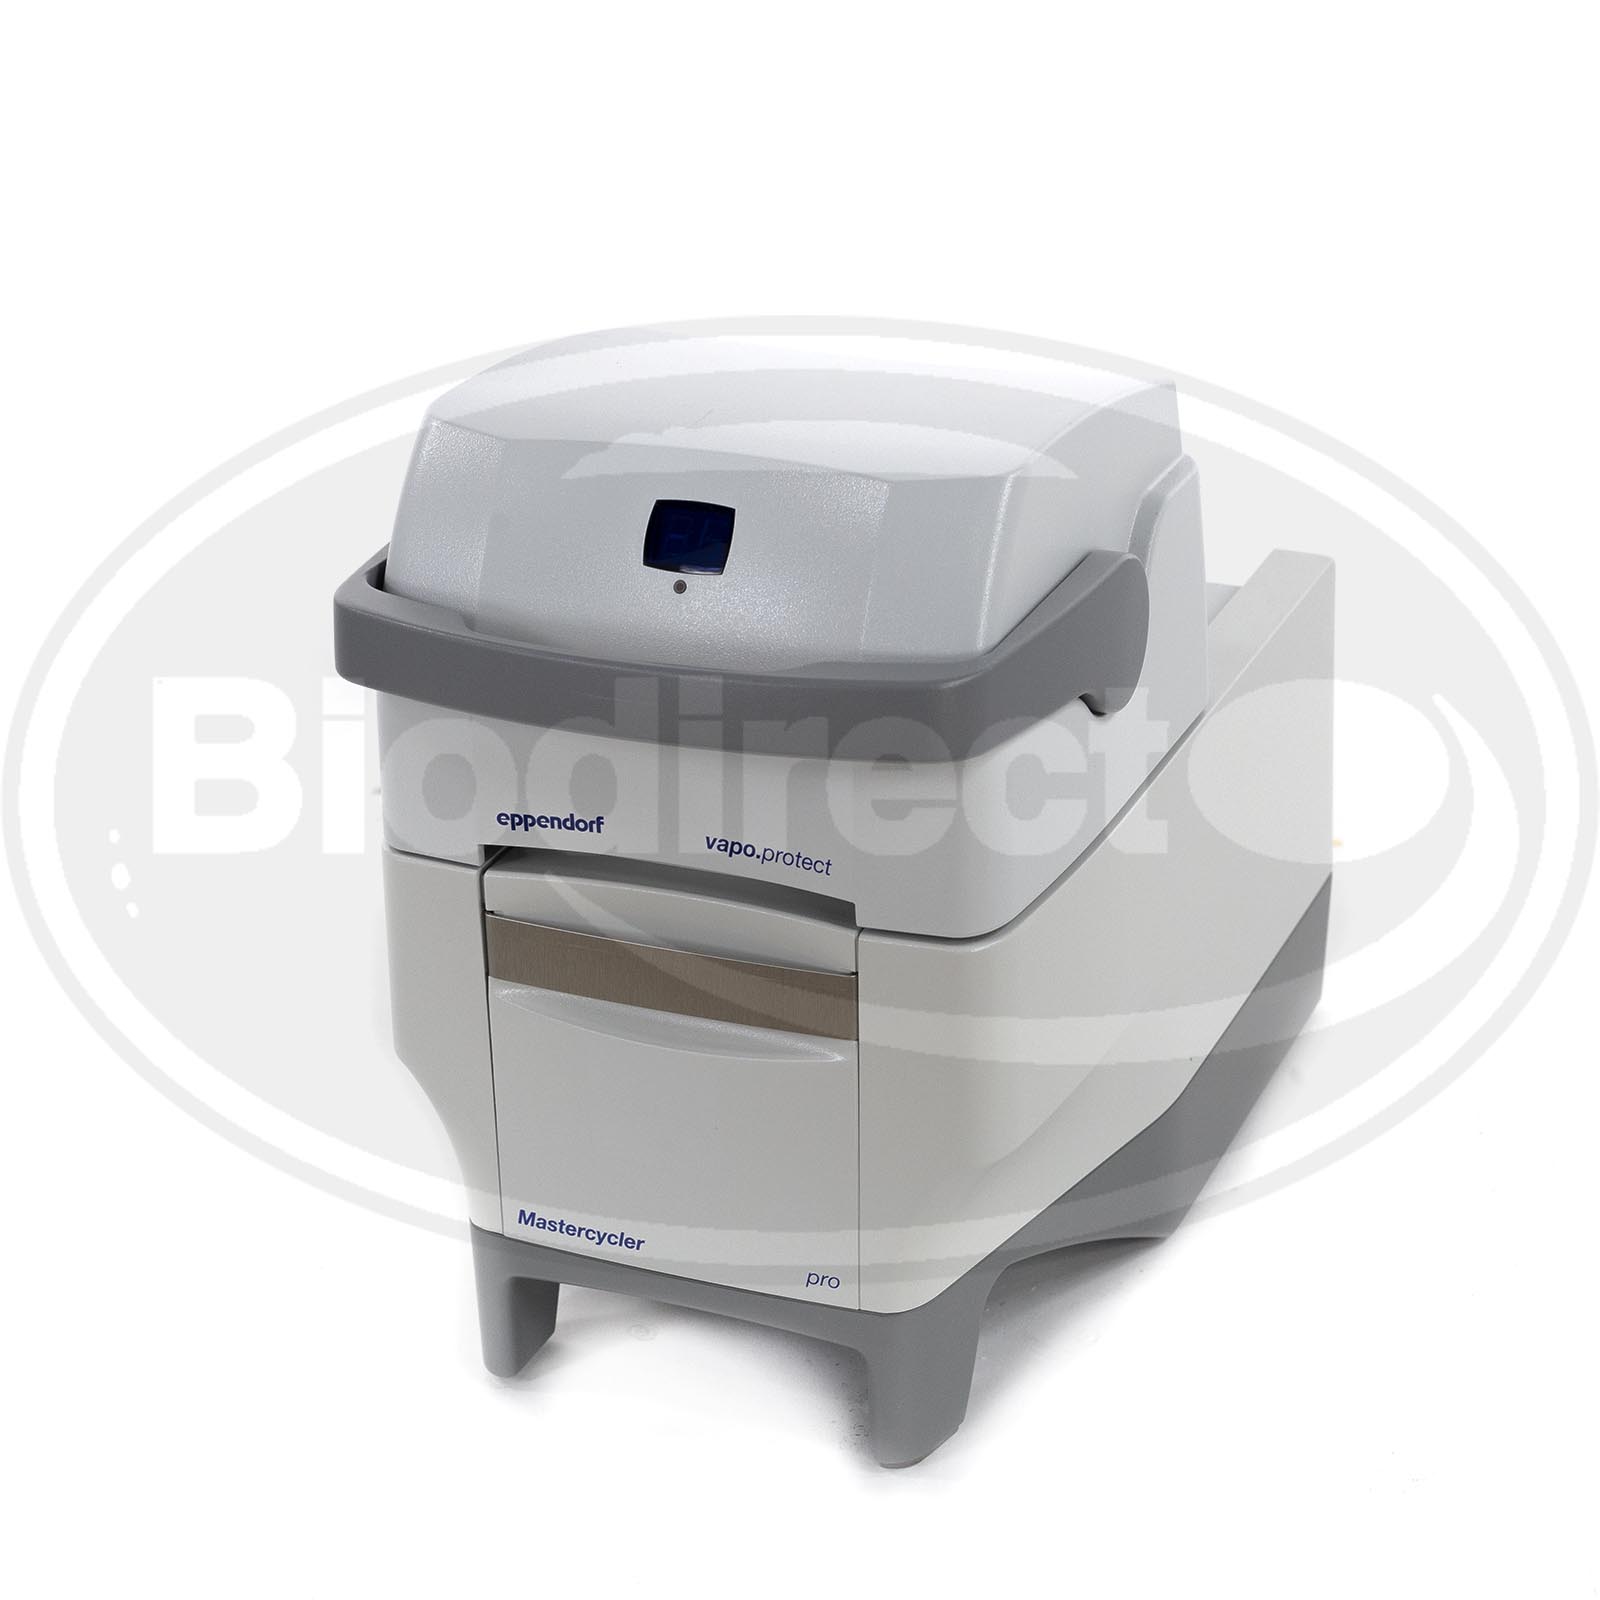 Eppendorf Thermal Cycler Mastercycler Pro S Vapo Protect